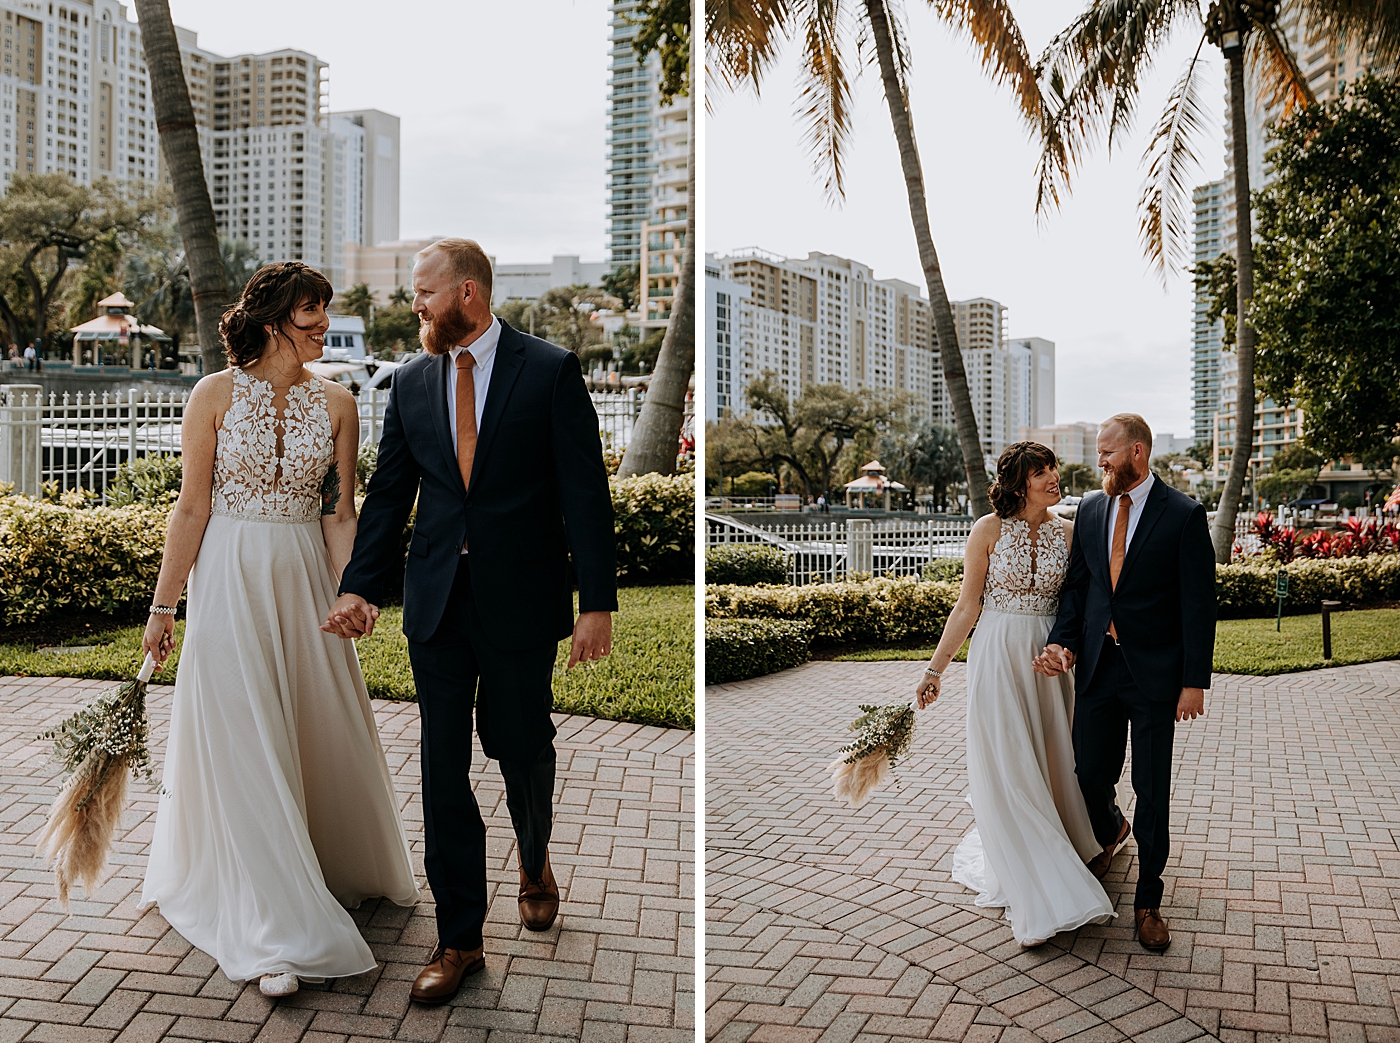 Bride and Groom walking together holding hands Historic Stranahan House Wedding Photography captured by South Florida Wedding Photographer Maggie Alvarez Photography